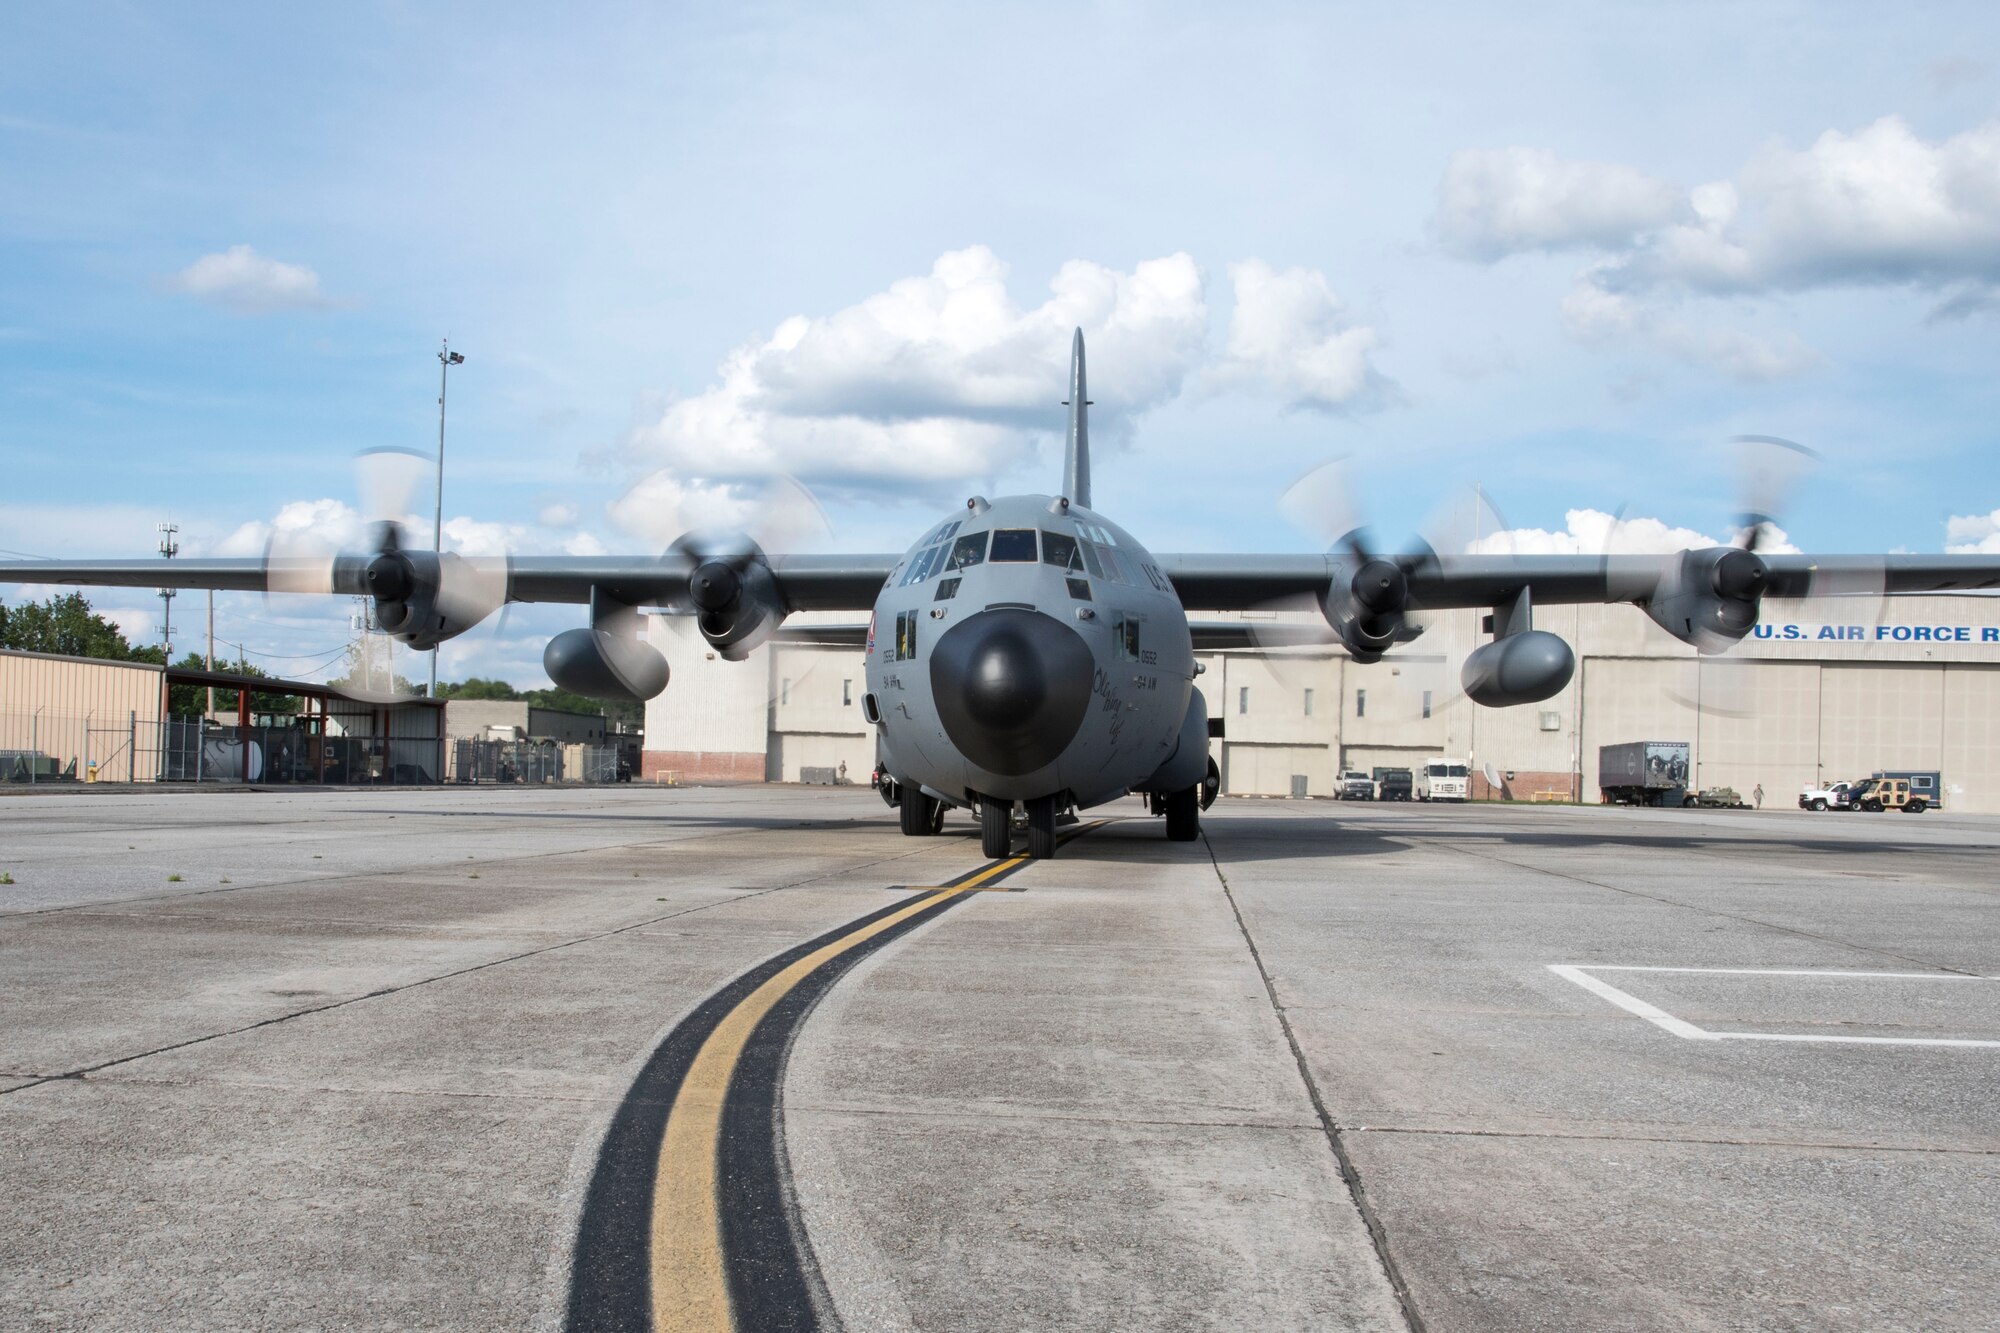 A Dobbins C-130H3 Hercules taxis on the flightline at Dobbins Air Reserve Base, Ga. on May 28, 2020. The aircraft picked up the four nurses who recently mobilized to New York City area hospitals to combat the COVID-19 pandemic. A C-17 Globemaster took the nurses from Joint Base McGuire Dix Lakehurst, N.J. to Charleston where the C-130 picked them up for the remaining leg of the journey. The C-130 then departed from Dobbins and took the remaining nurses to Robins AFB, Ga. (U.S. Air Force photo/Andrew Park)